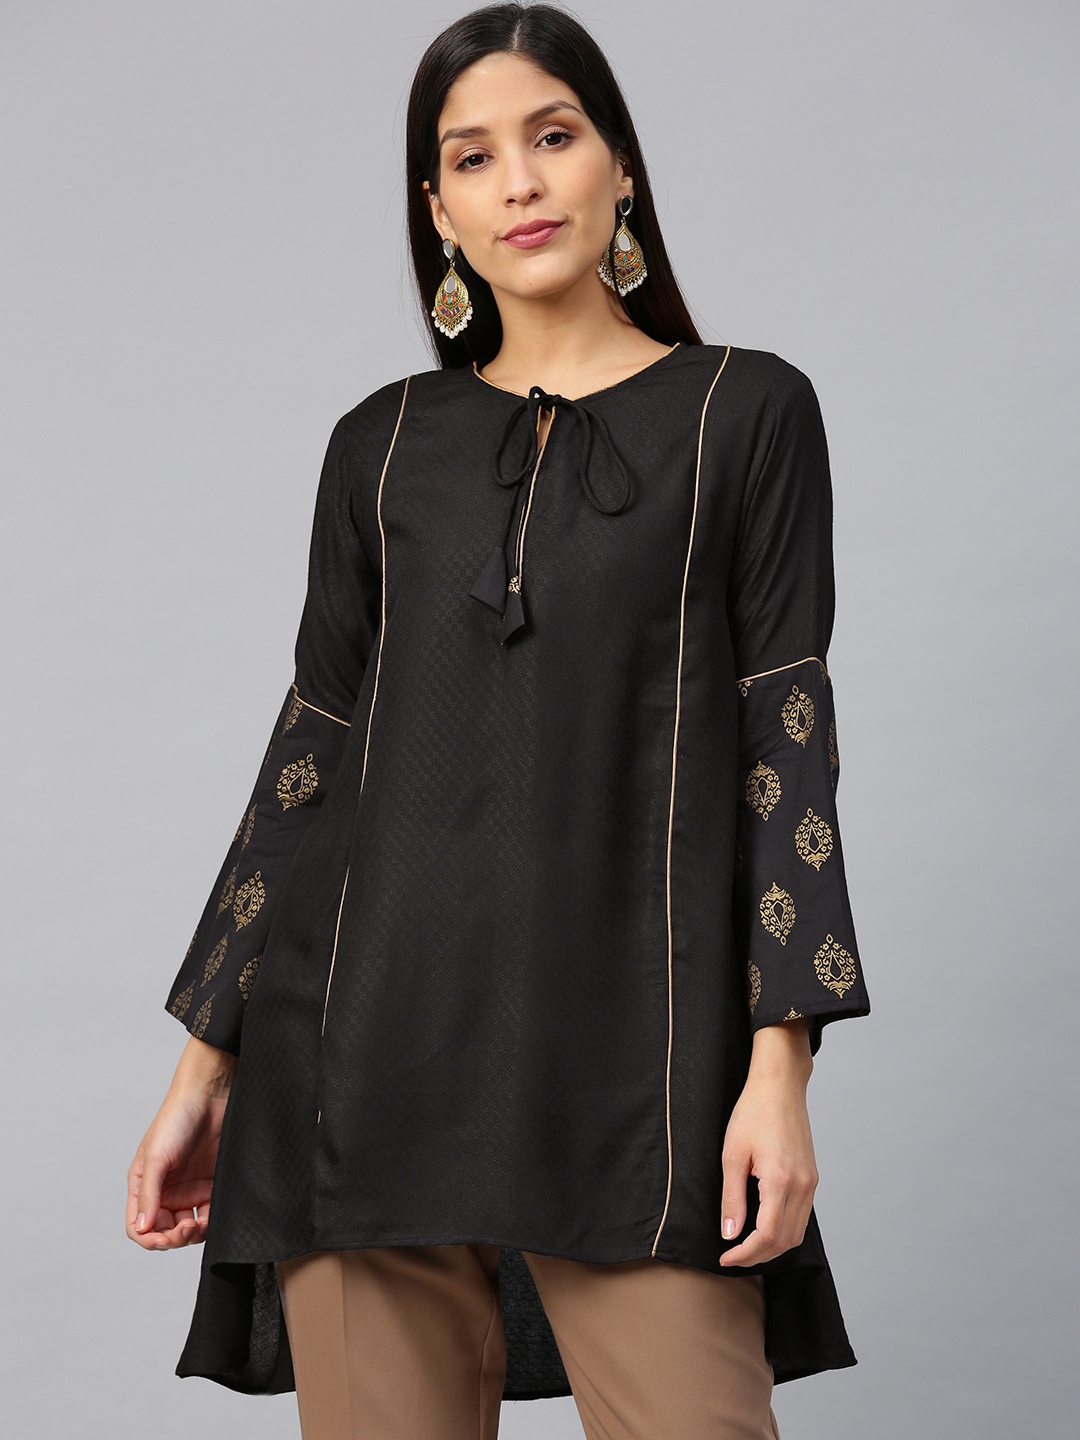 Bhama Couture Black Self-Design A-Line High-Low Pure Cotton Kurti Price in India